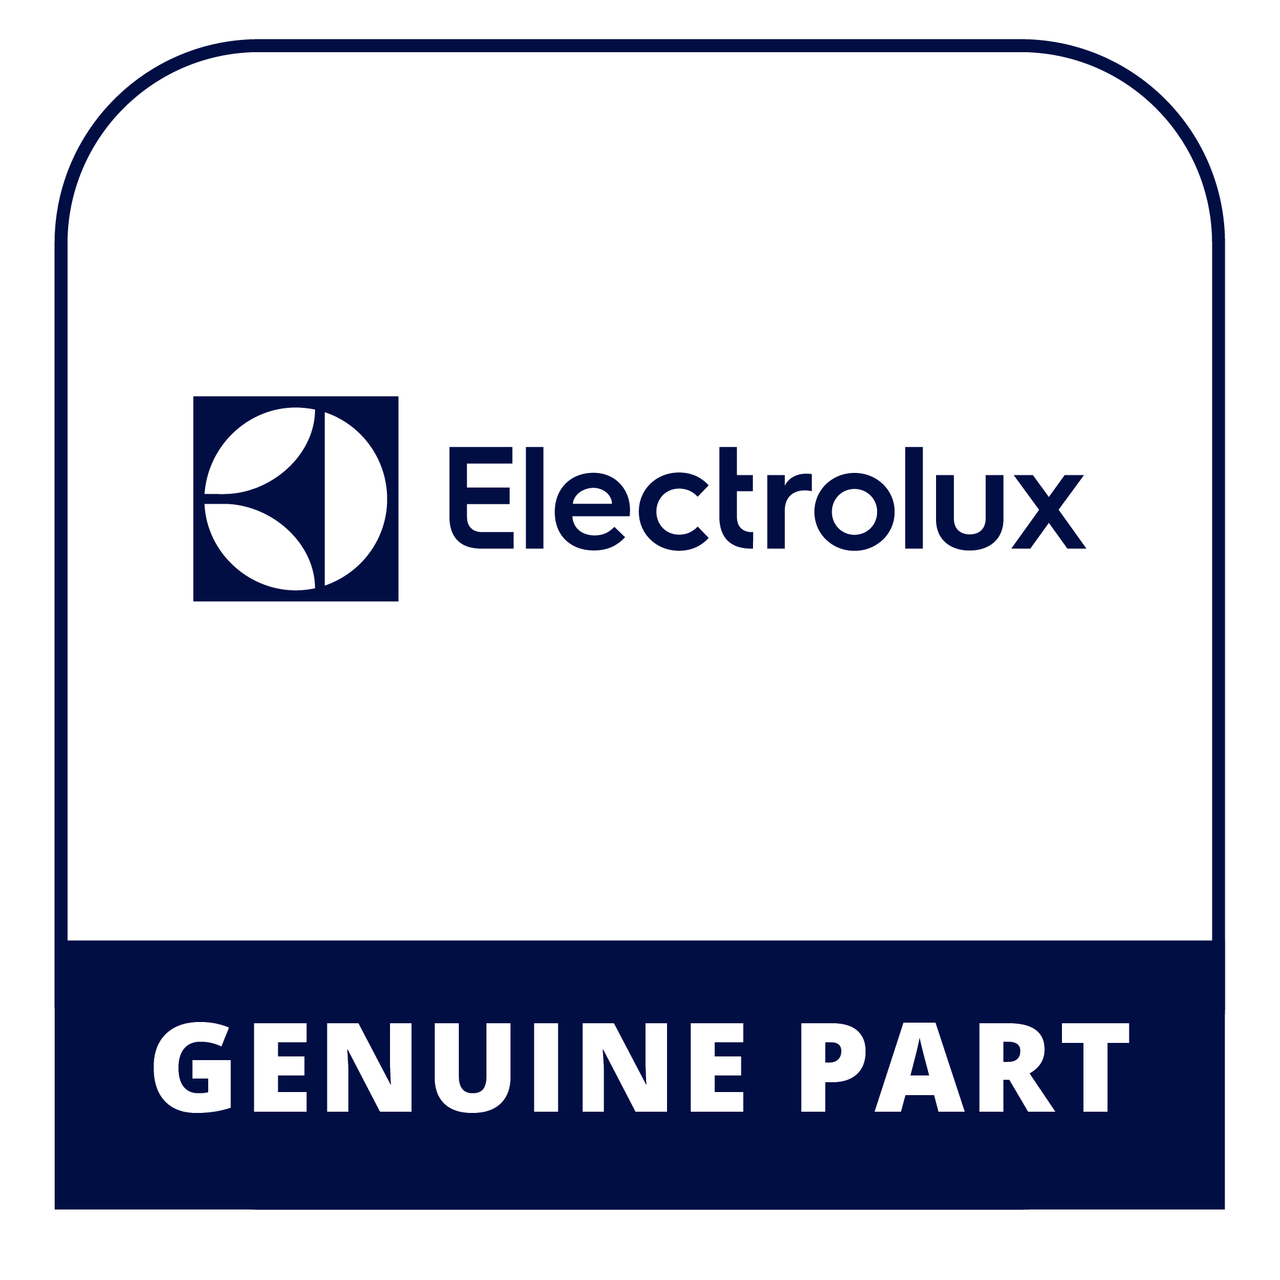 Frigidaire - Electrolux 5304497386 Owners Manual - Genuine Electrolux Part